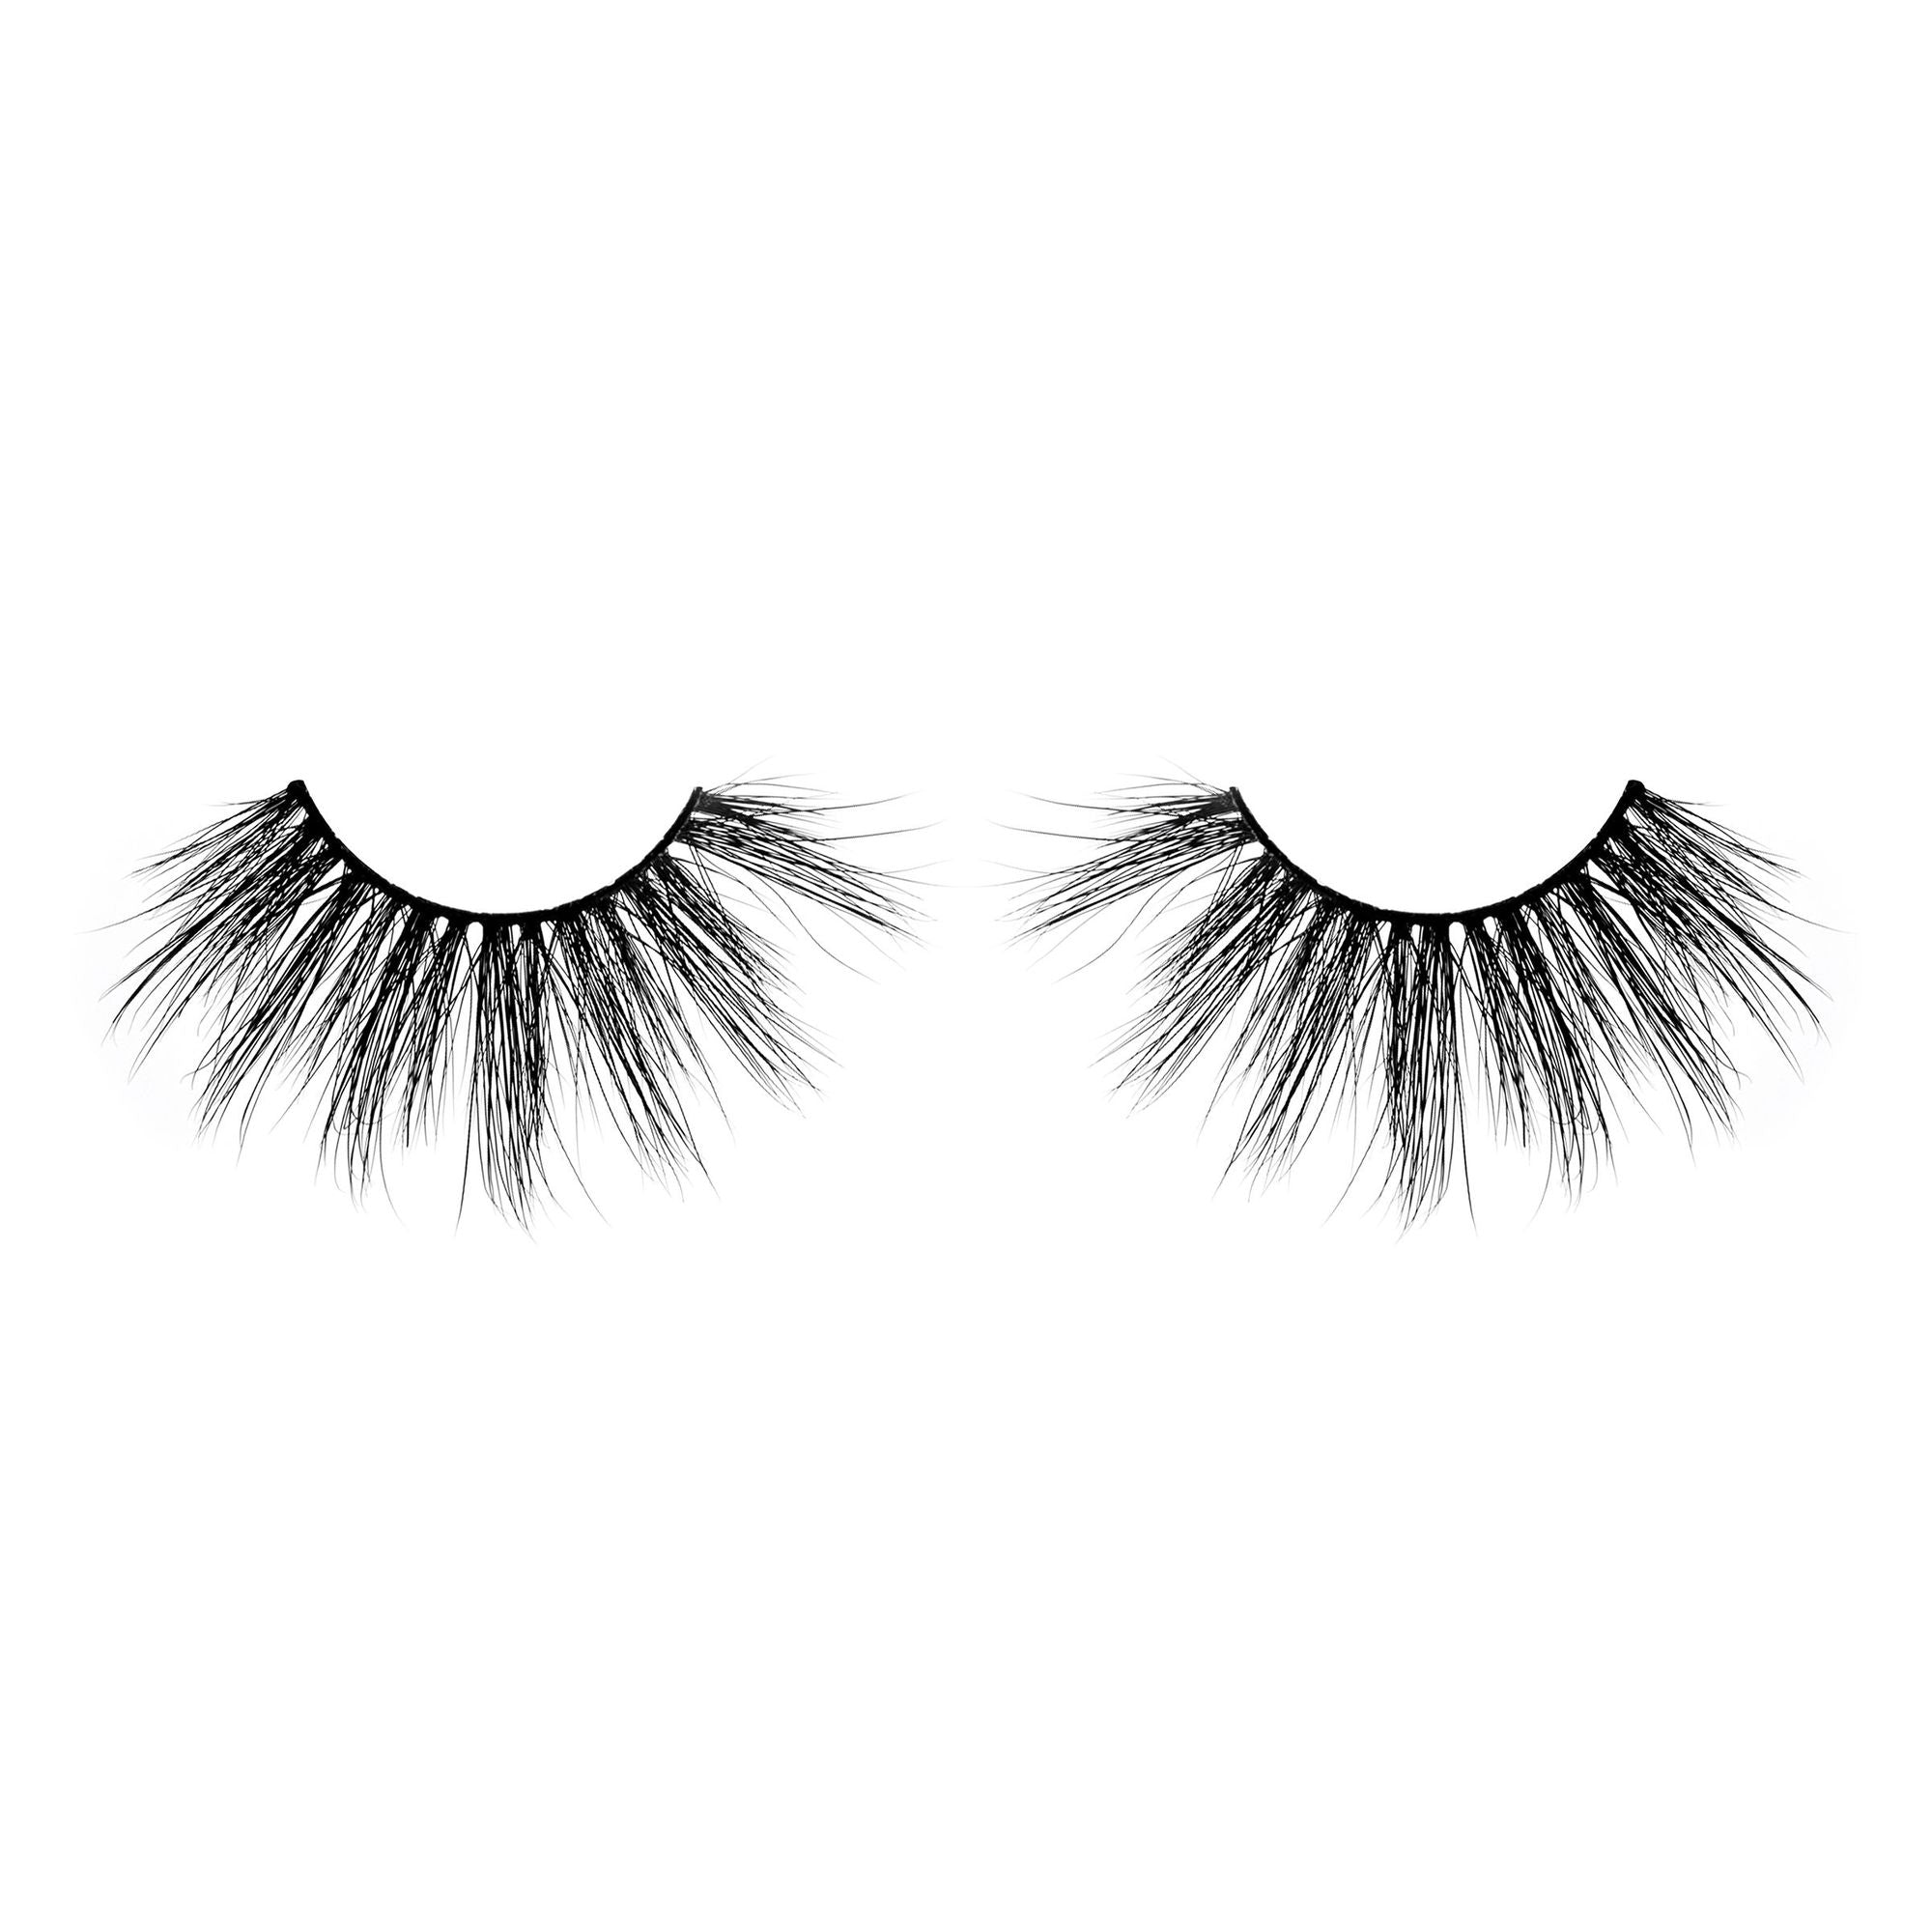 Glamour Us_Beauty Creations_Lashes_BABE WATCH 35 MM Faux Mink Lashes__BC-35MMFL-BW